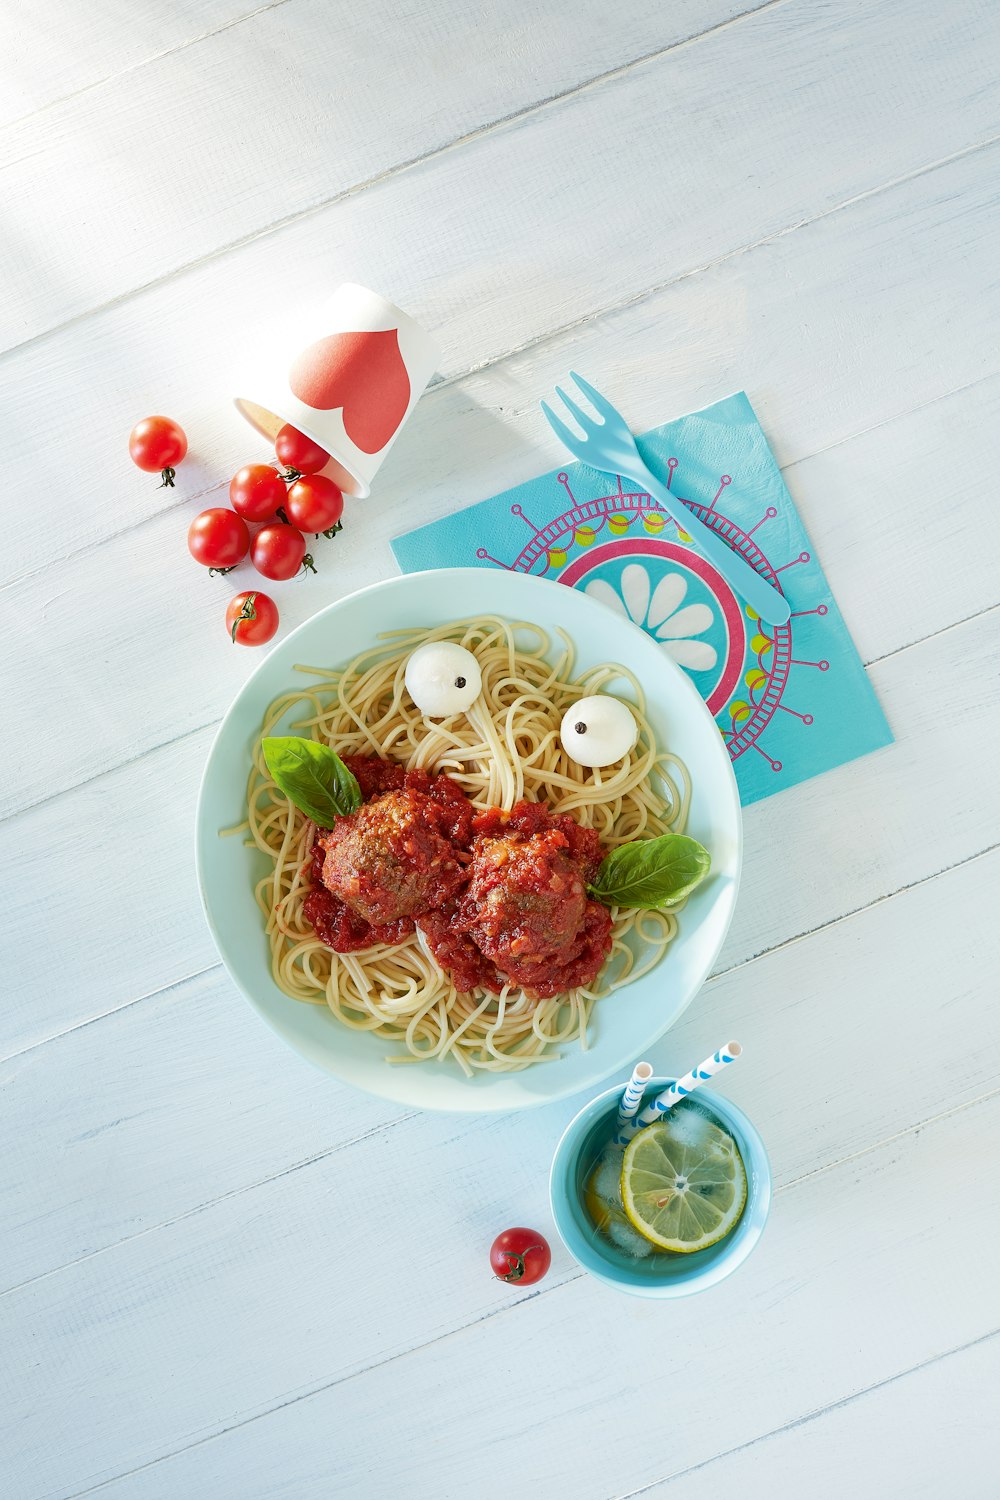 green and white ceramic bowl with pasta and sliced tomato